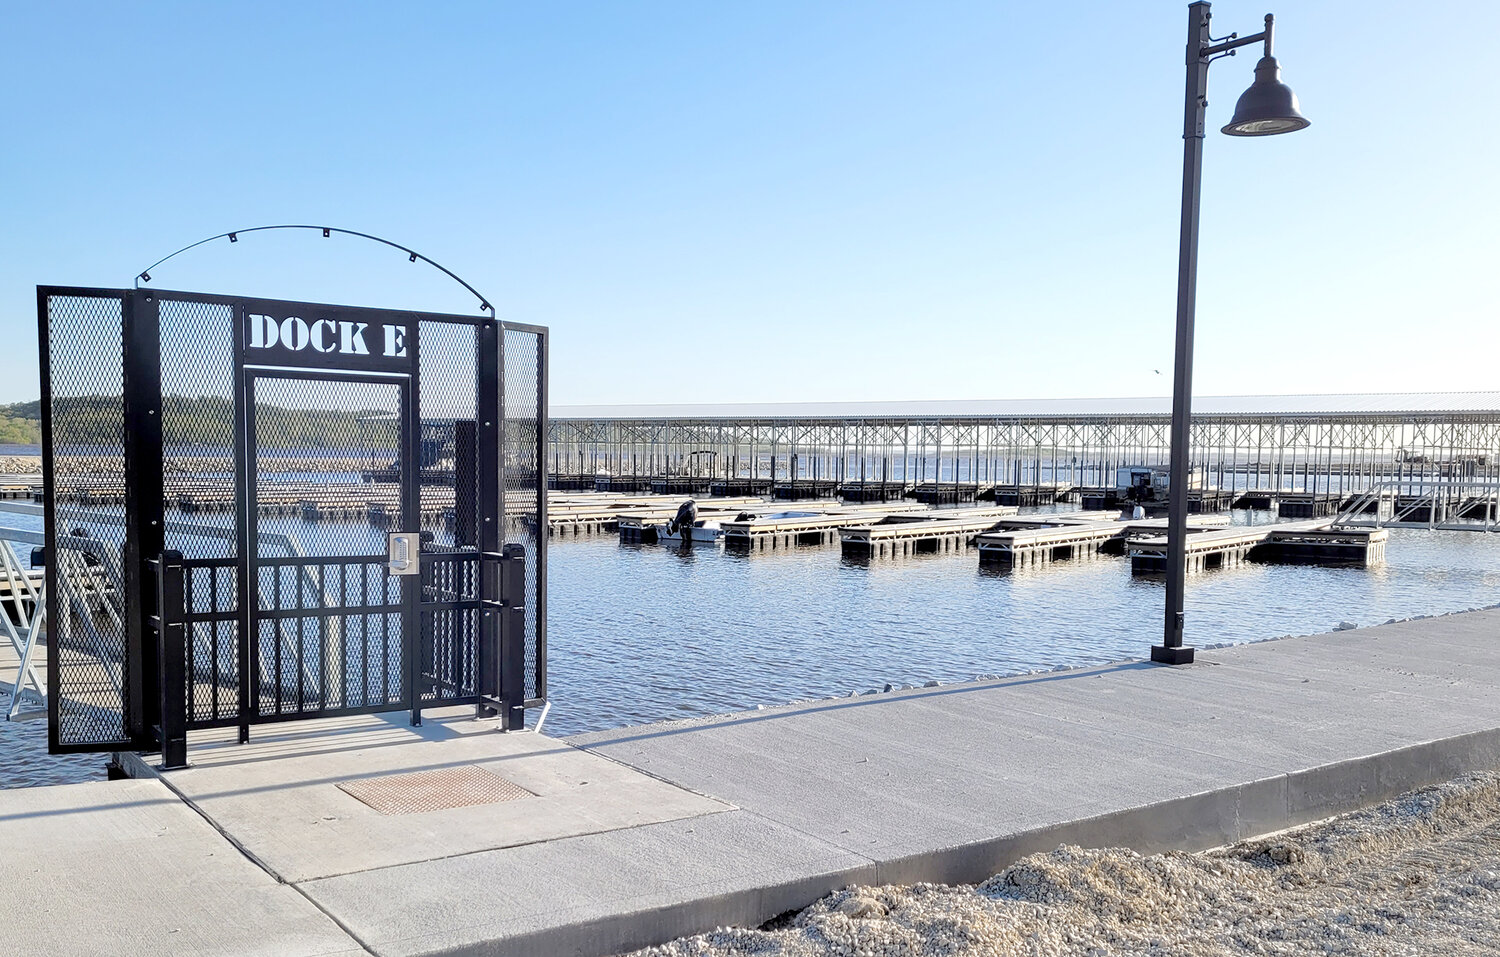 The gate to Dock E shows the modern style of the city's new Marina project. Several docks have been completed and more are underway down on the Fort Madison river front.